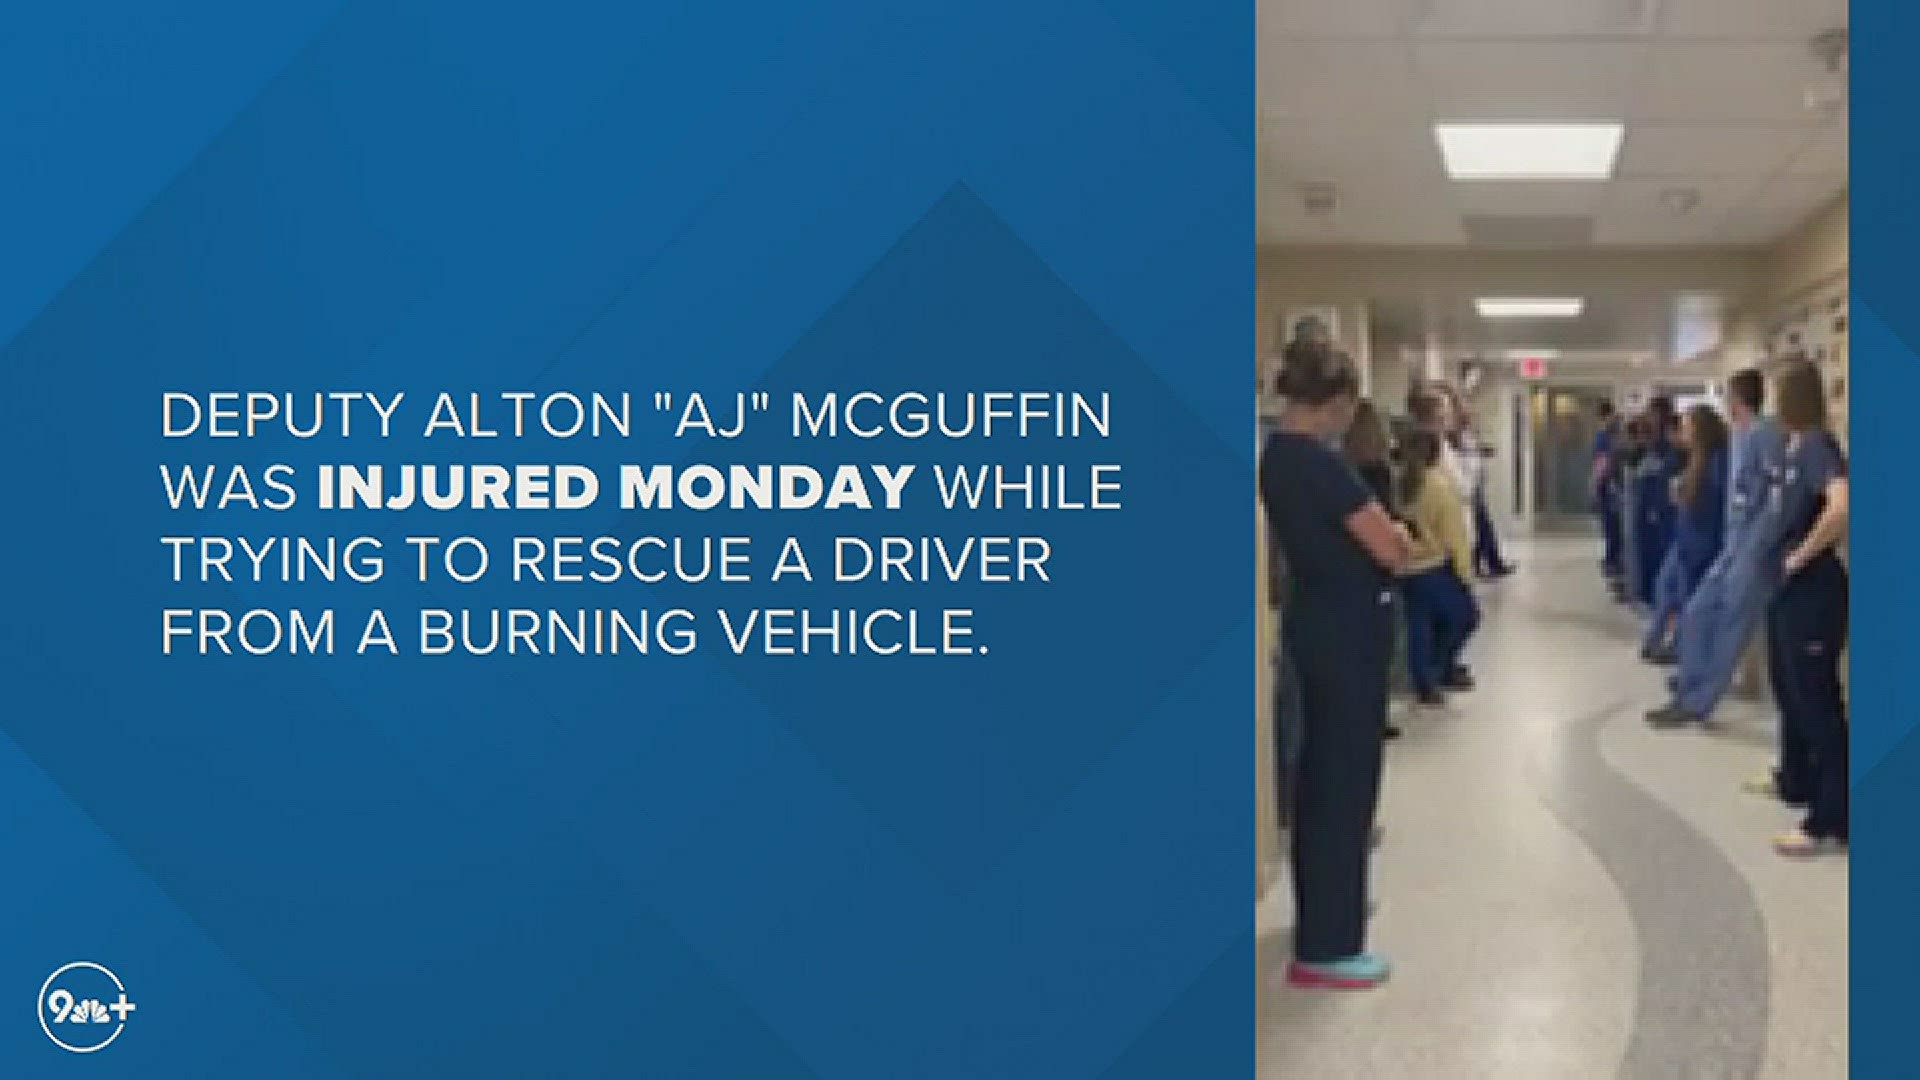 Logan County Sheriff's Office deputy Alton "AJ" McGuffin was injured Monday during unsuccessful attempts to rescue a driver from a burning vehicle.